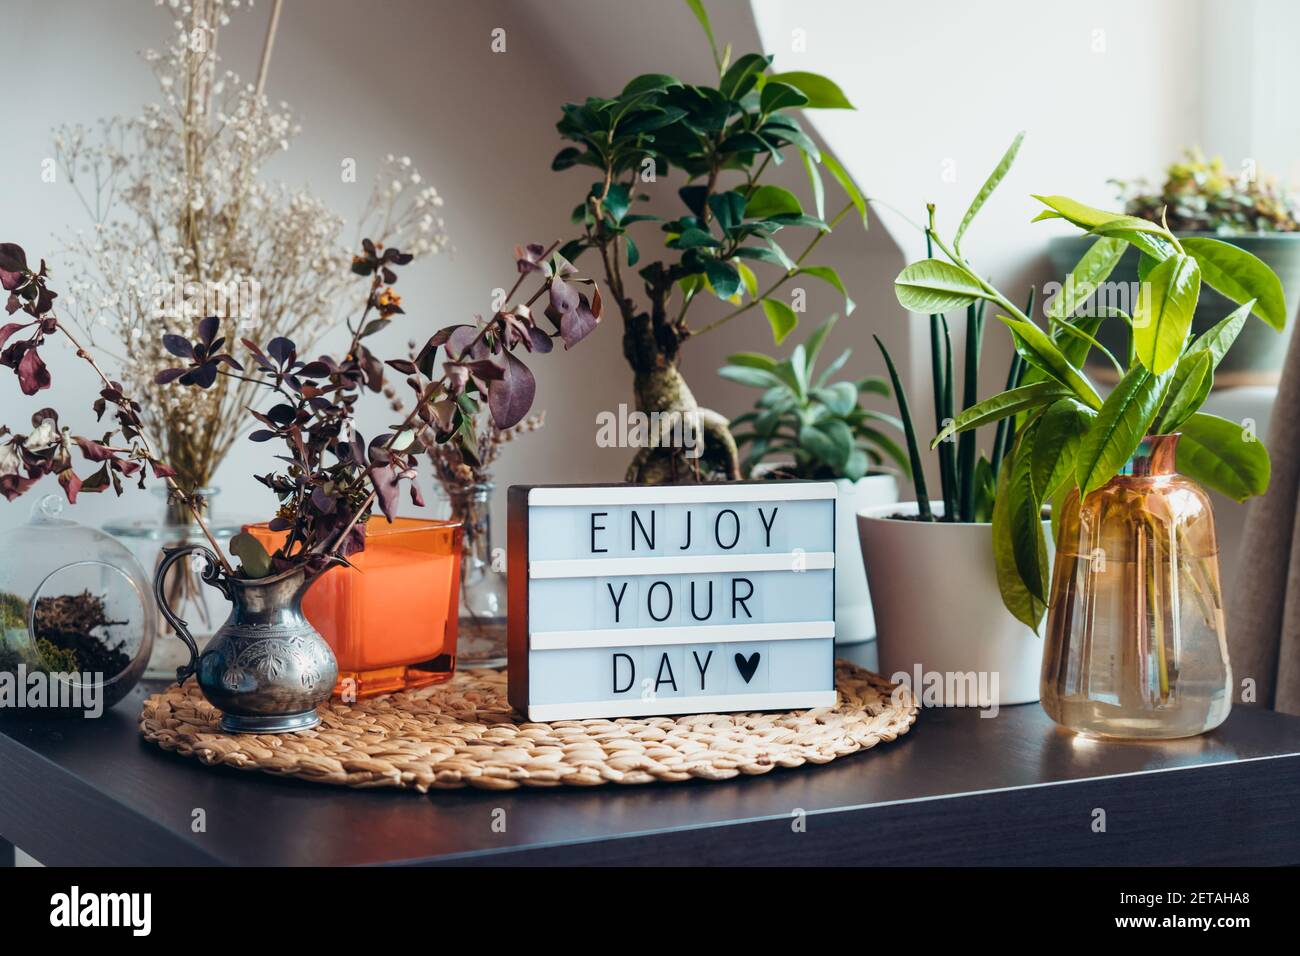 Enjoy your day message on lightbox standing on a table with green home plants. Home gardening corner inside of the house. Calm and cozy area for Stock Photo